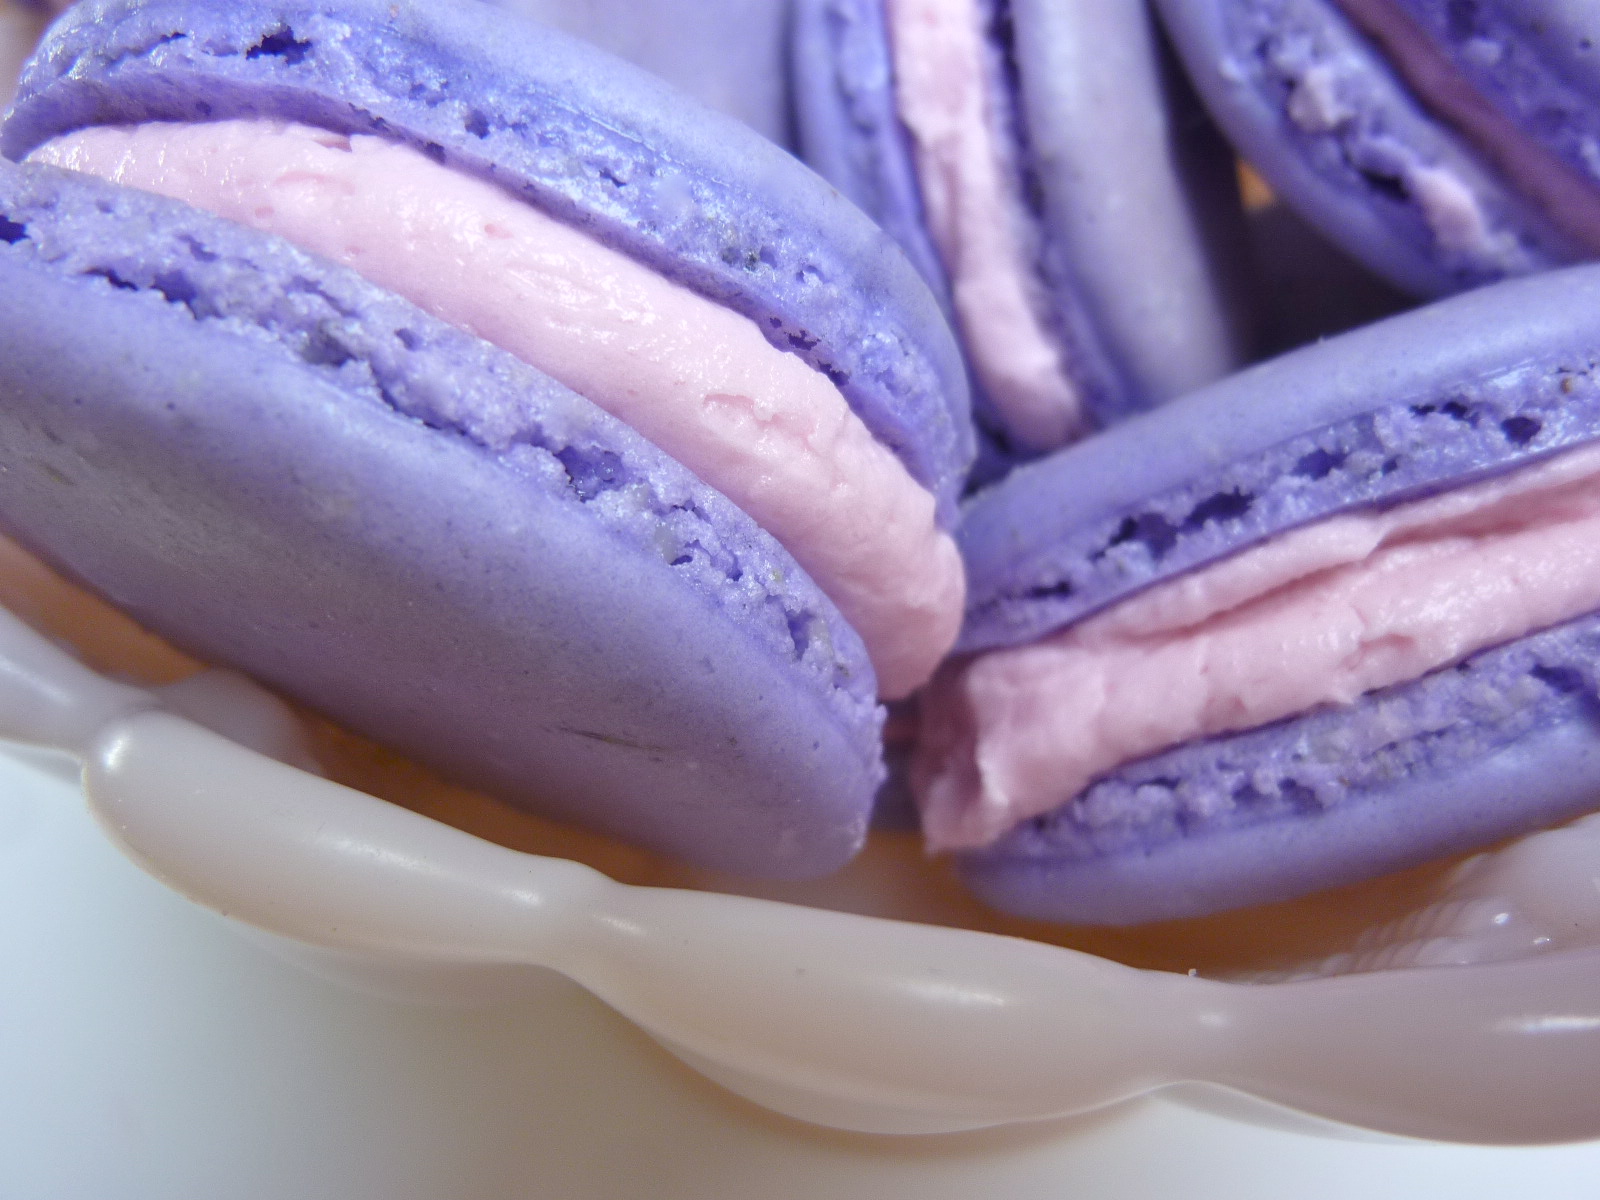 Diary of a Mad Hausfrau: Lavender Macarons with Orchid Buttercream